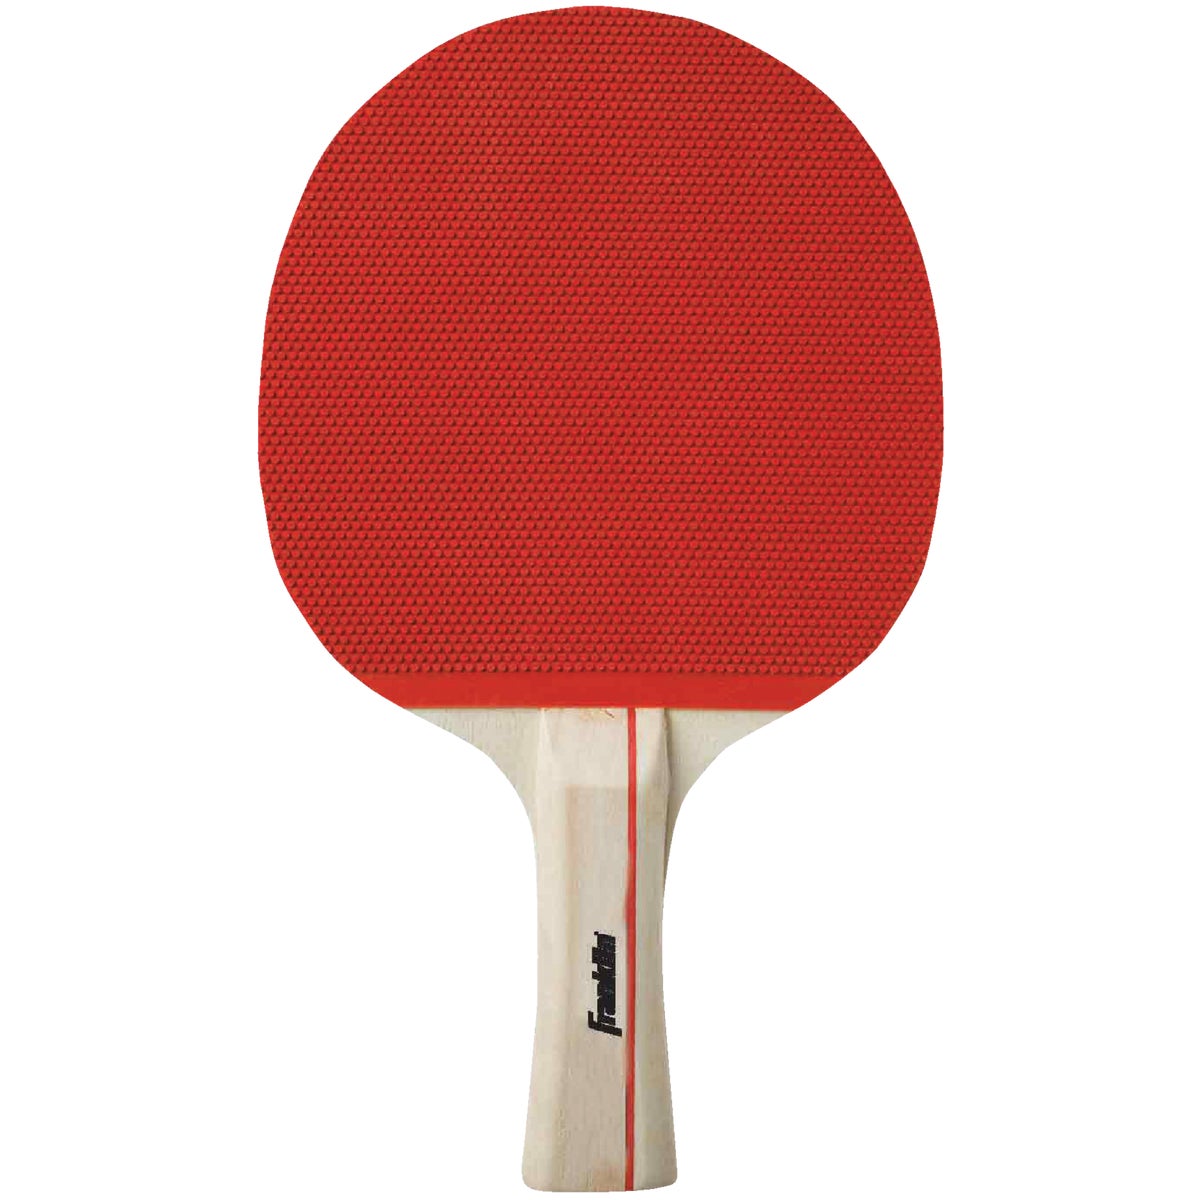 Franklin 57200 Franklin Straight Handle Rubber Face Table Tennis Paddle 57200